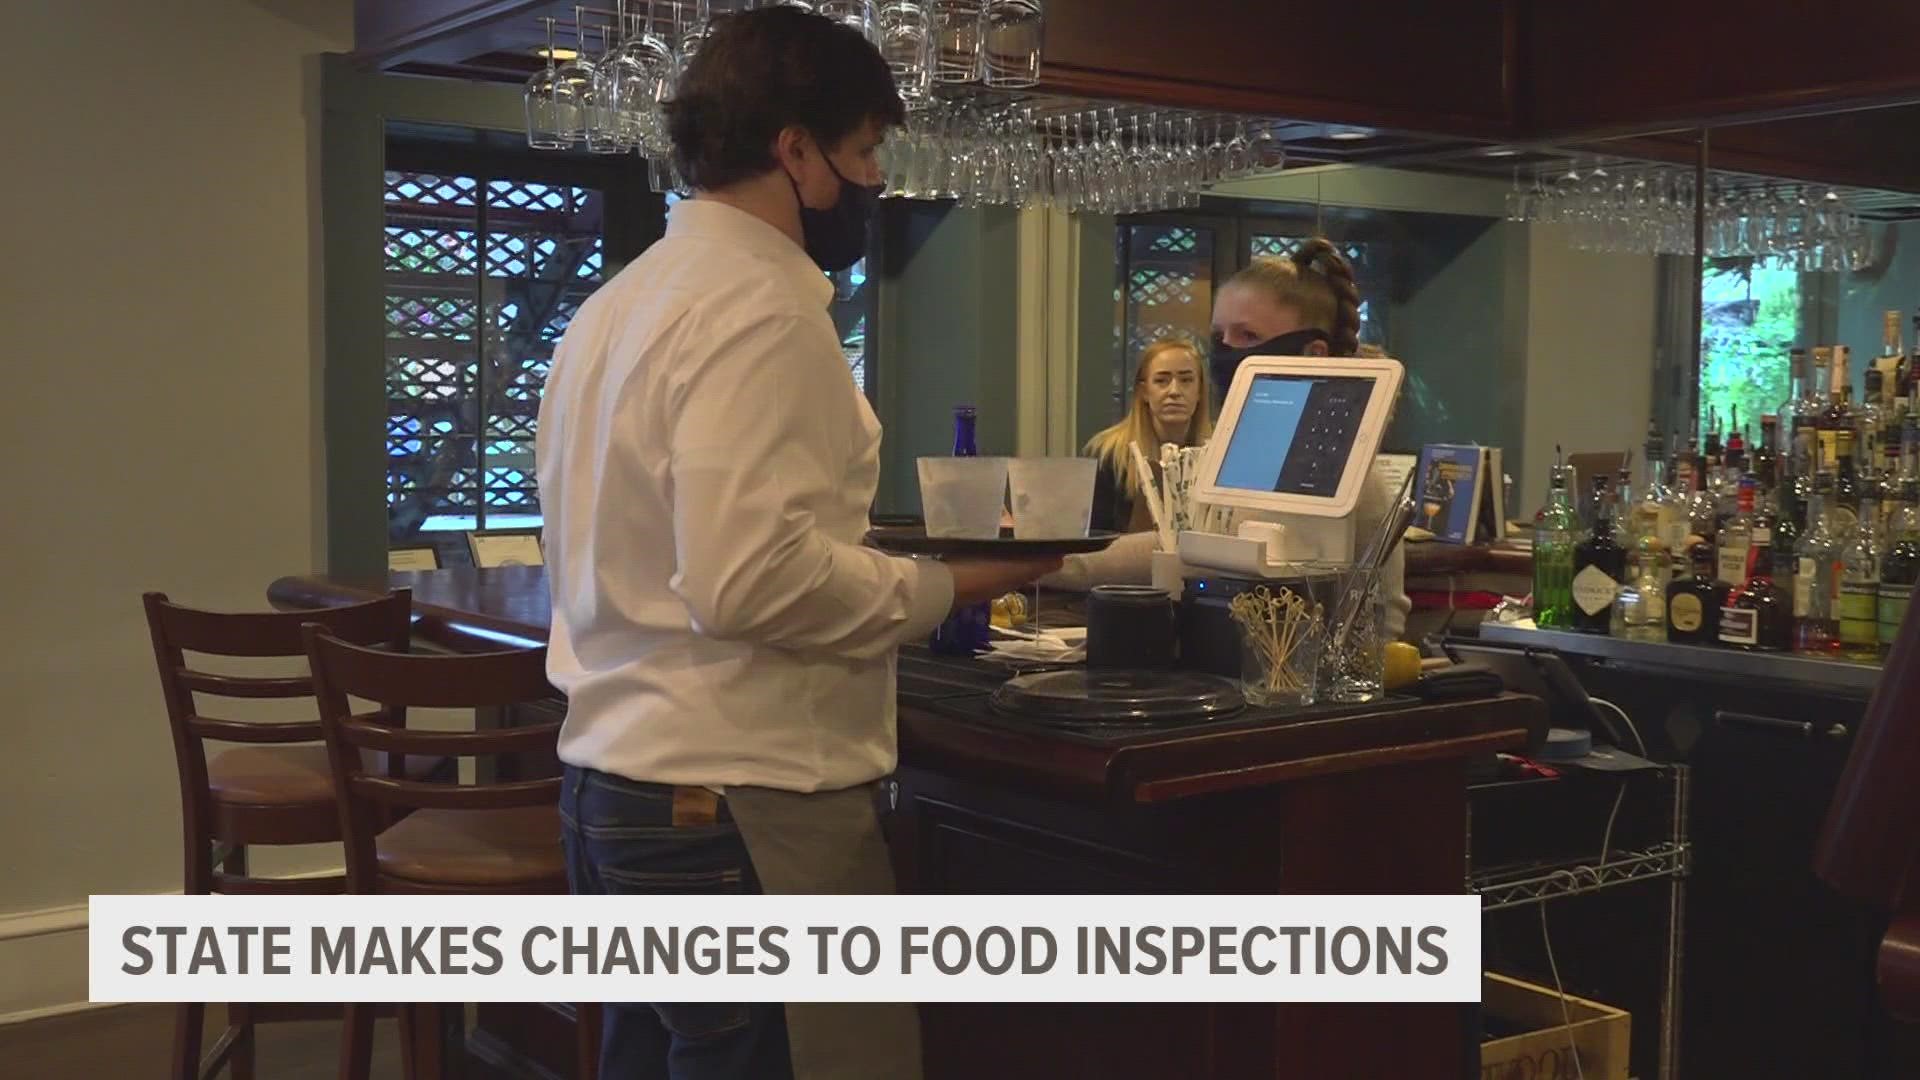 The Iowa Department of Inspections and Appeals alongside the Food and Consumer Safety Bureau have made changes to the frequency of inspections in the state.